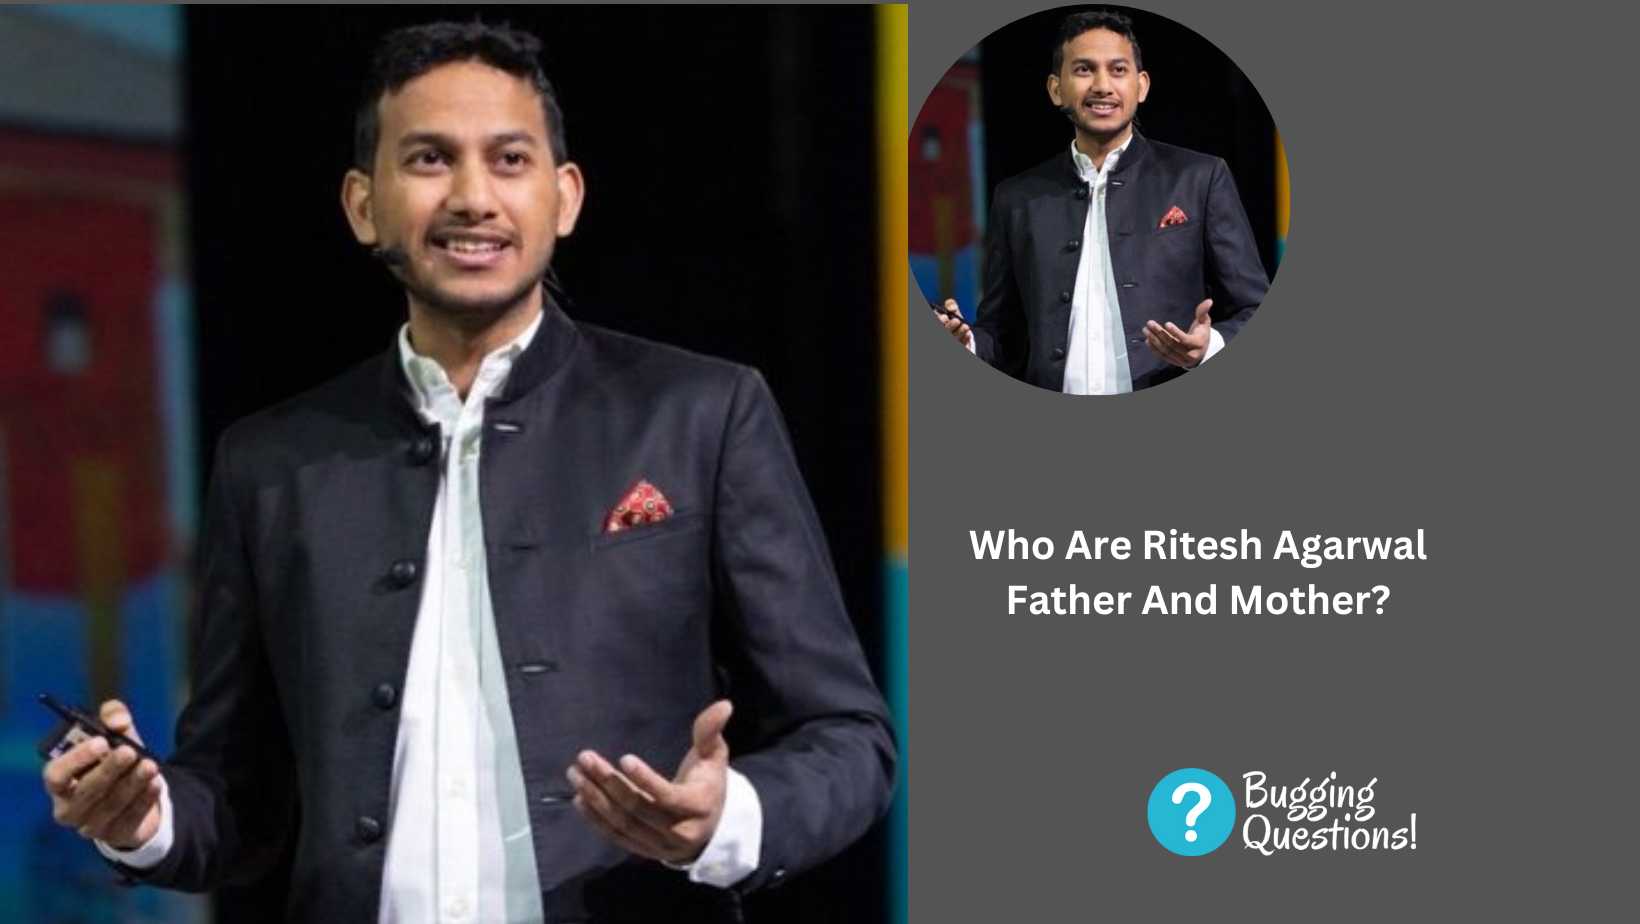 Who Are Ritesh Agarwal Father And Mother?